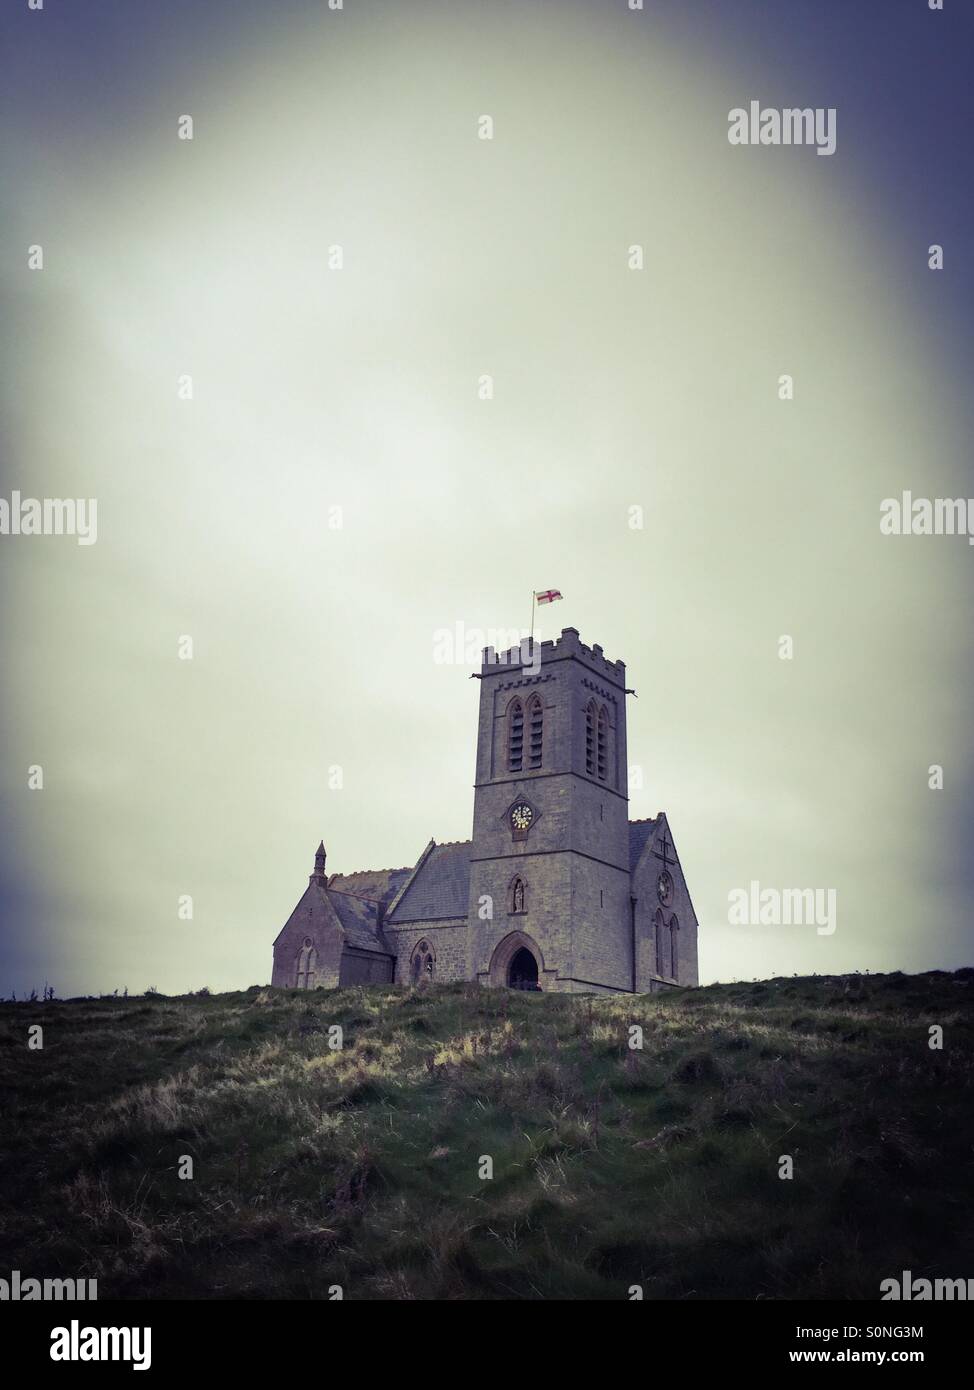 Old English church on a hill Stock Photo